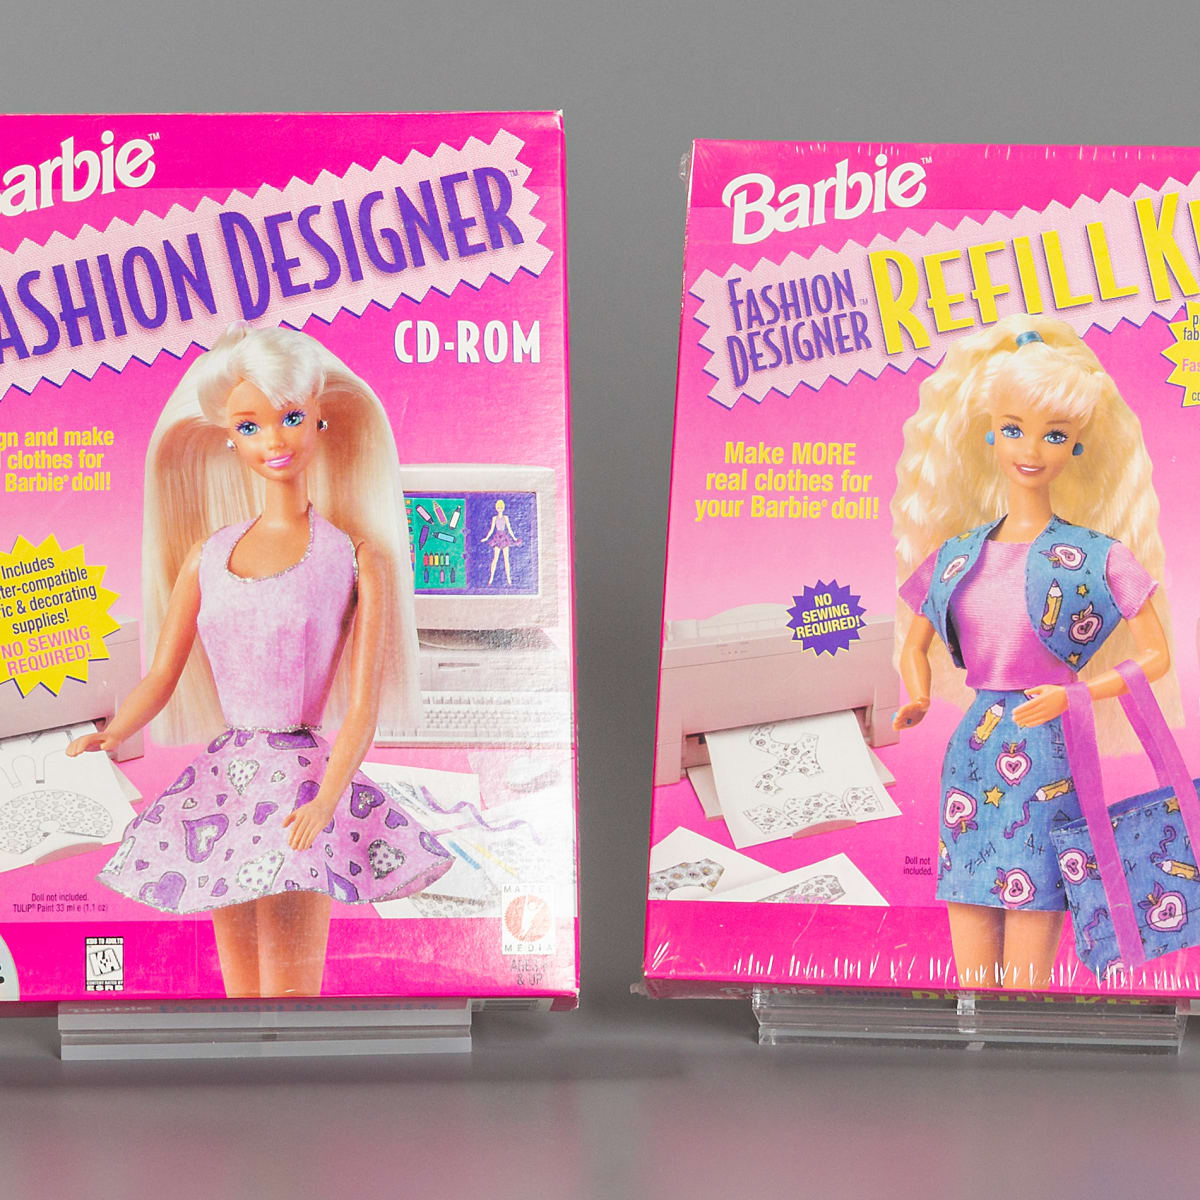 Fashion joins Video Game Hall Fame - Video Games on Sports Illustrated